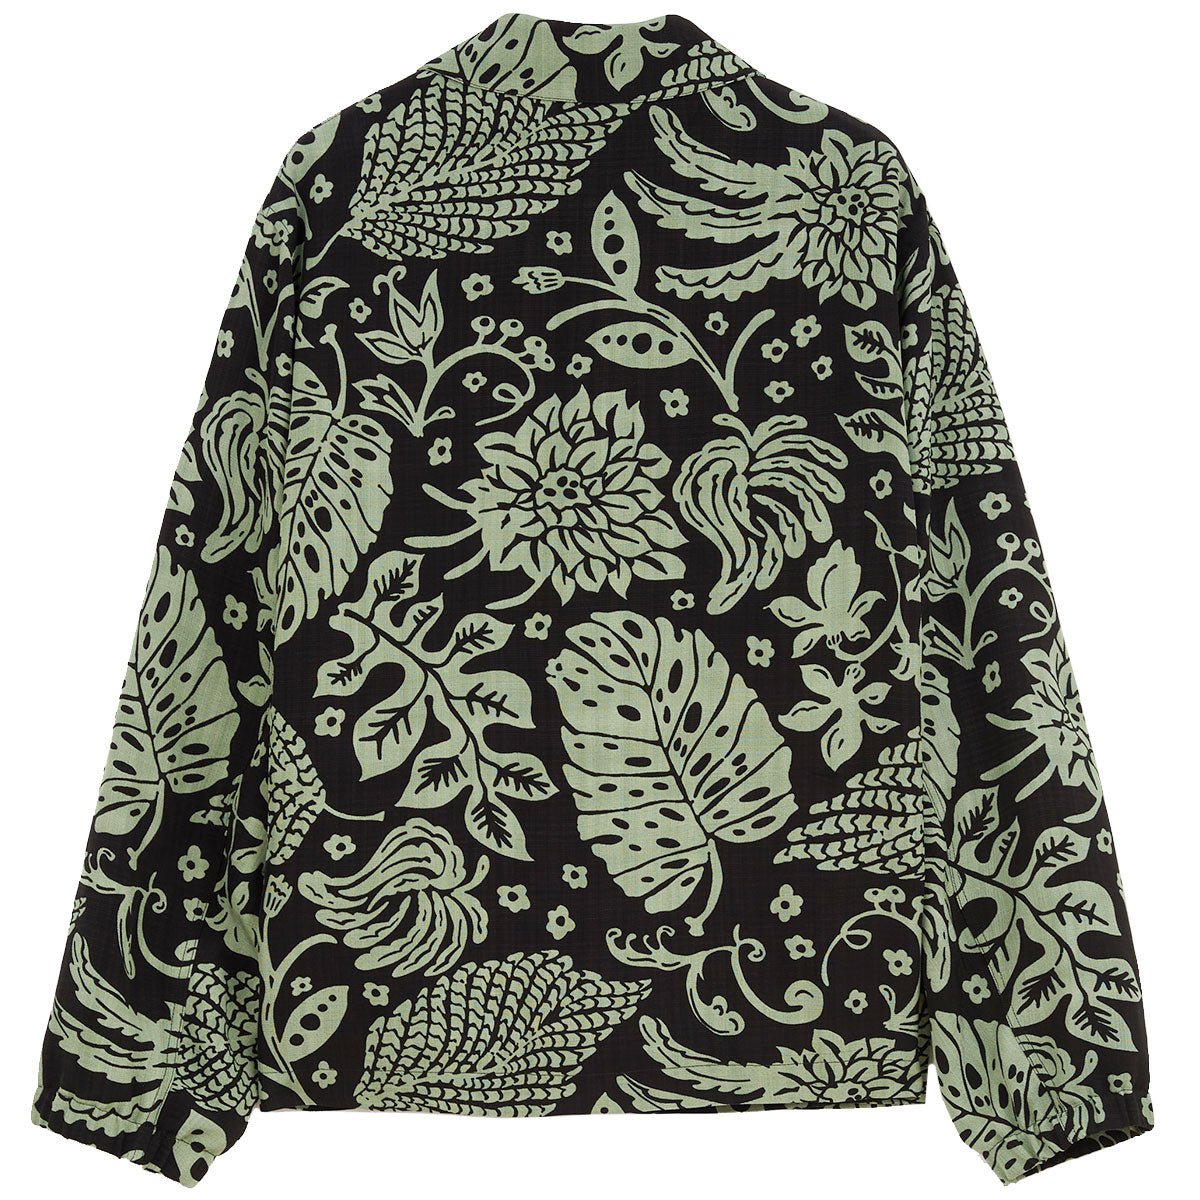 BLOUSON 08 - HAWAIAN FLOWER PRINT ON TEXTURED VI - Why are you here?